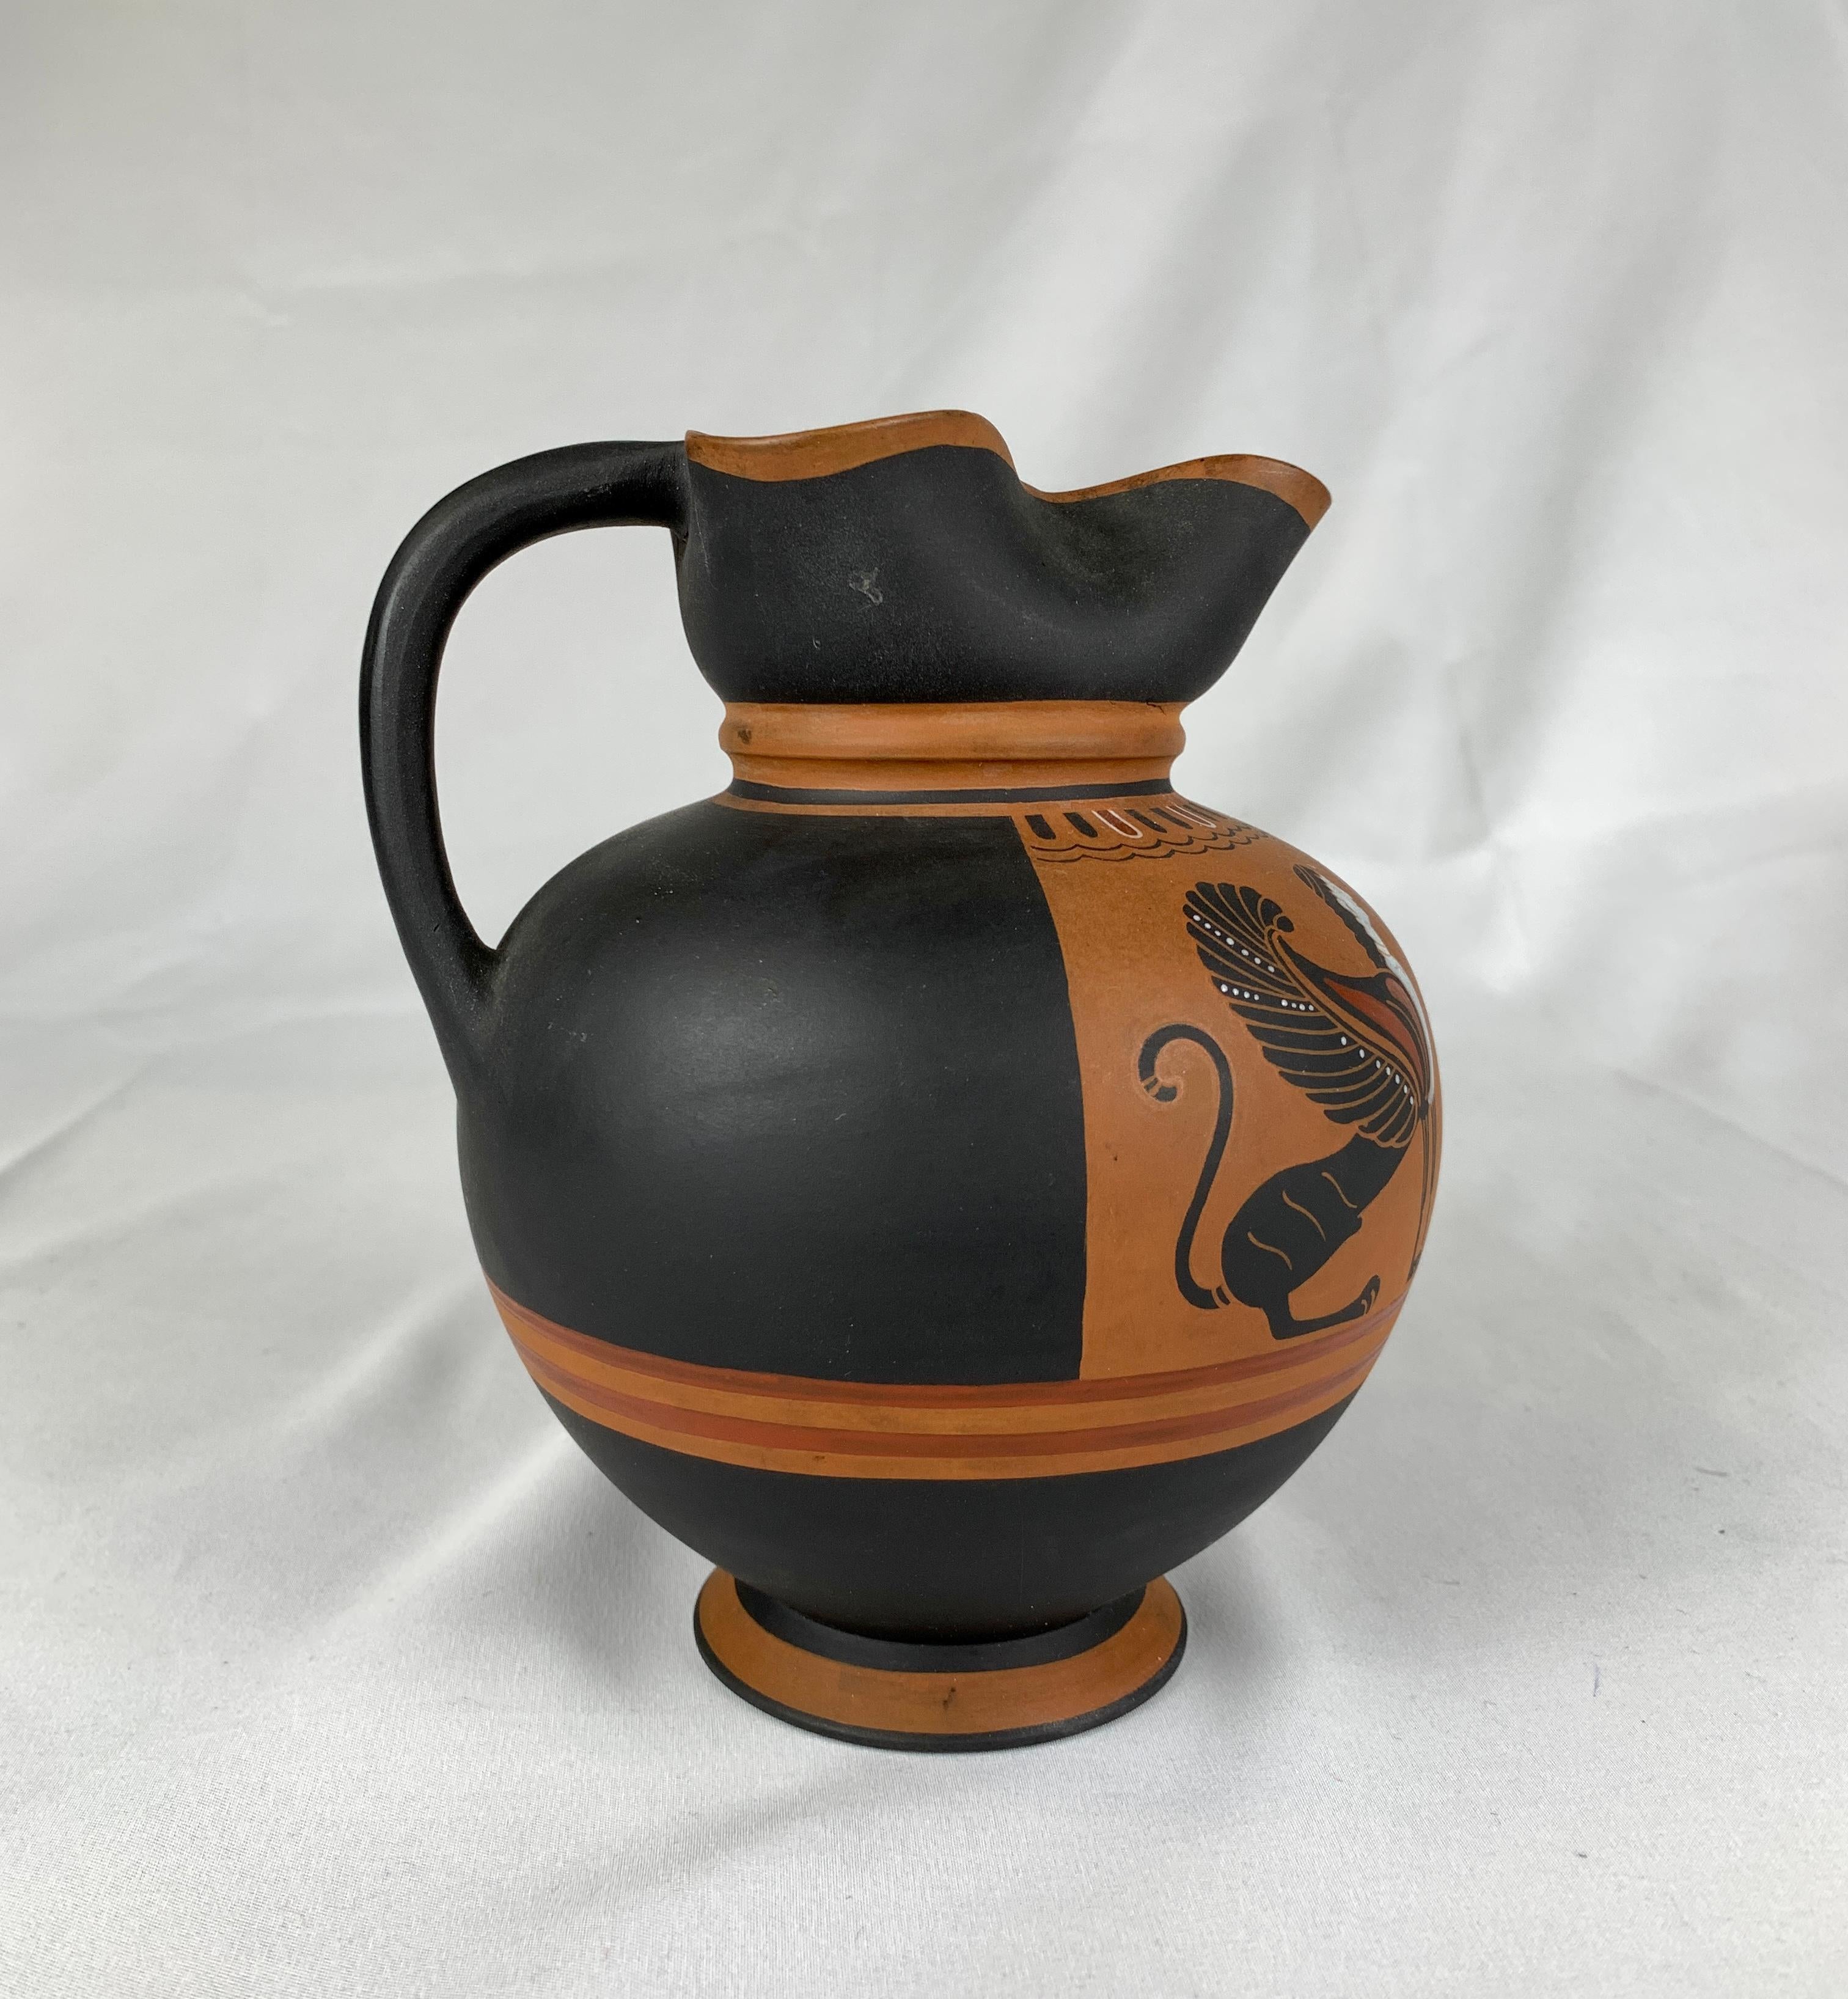 This special edition Wedgwood ale jug is decorated in Egyptian Revival style, showing a sphinx to either side of a firebird in flight. The material is Wedwood's Black Basalt stoneware with Wedgwood's Rosso Antico decoration in the Greek black-figure